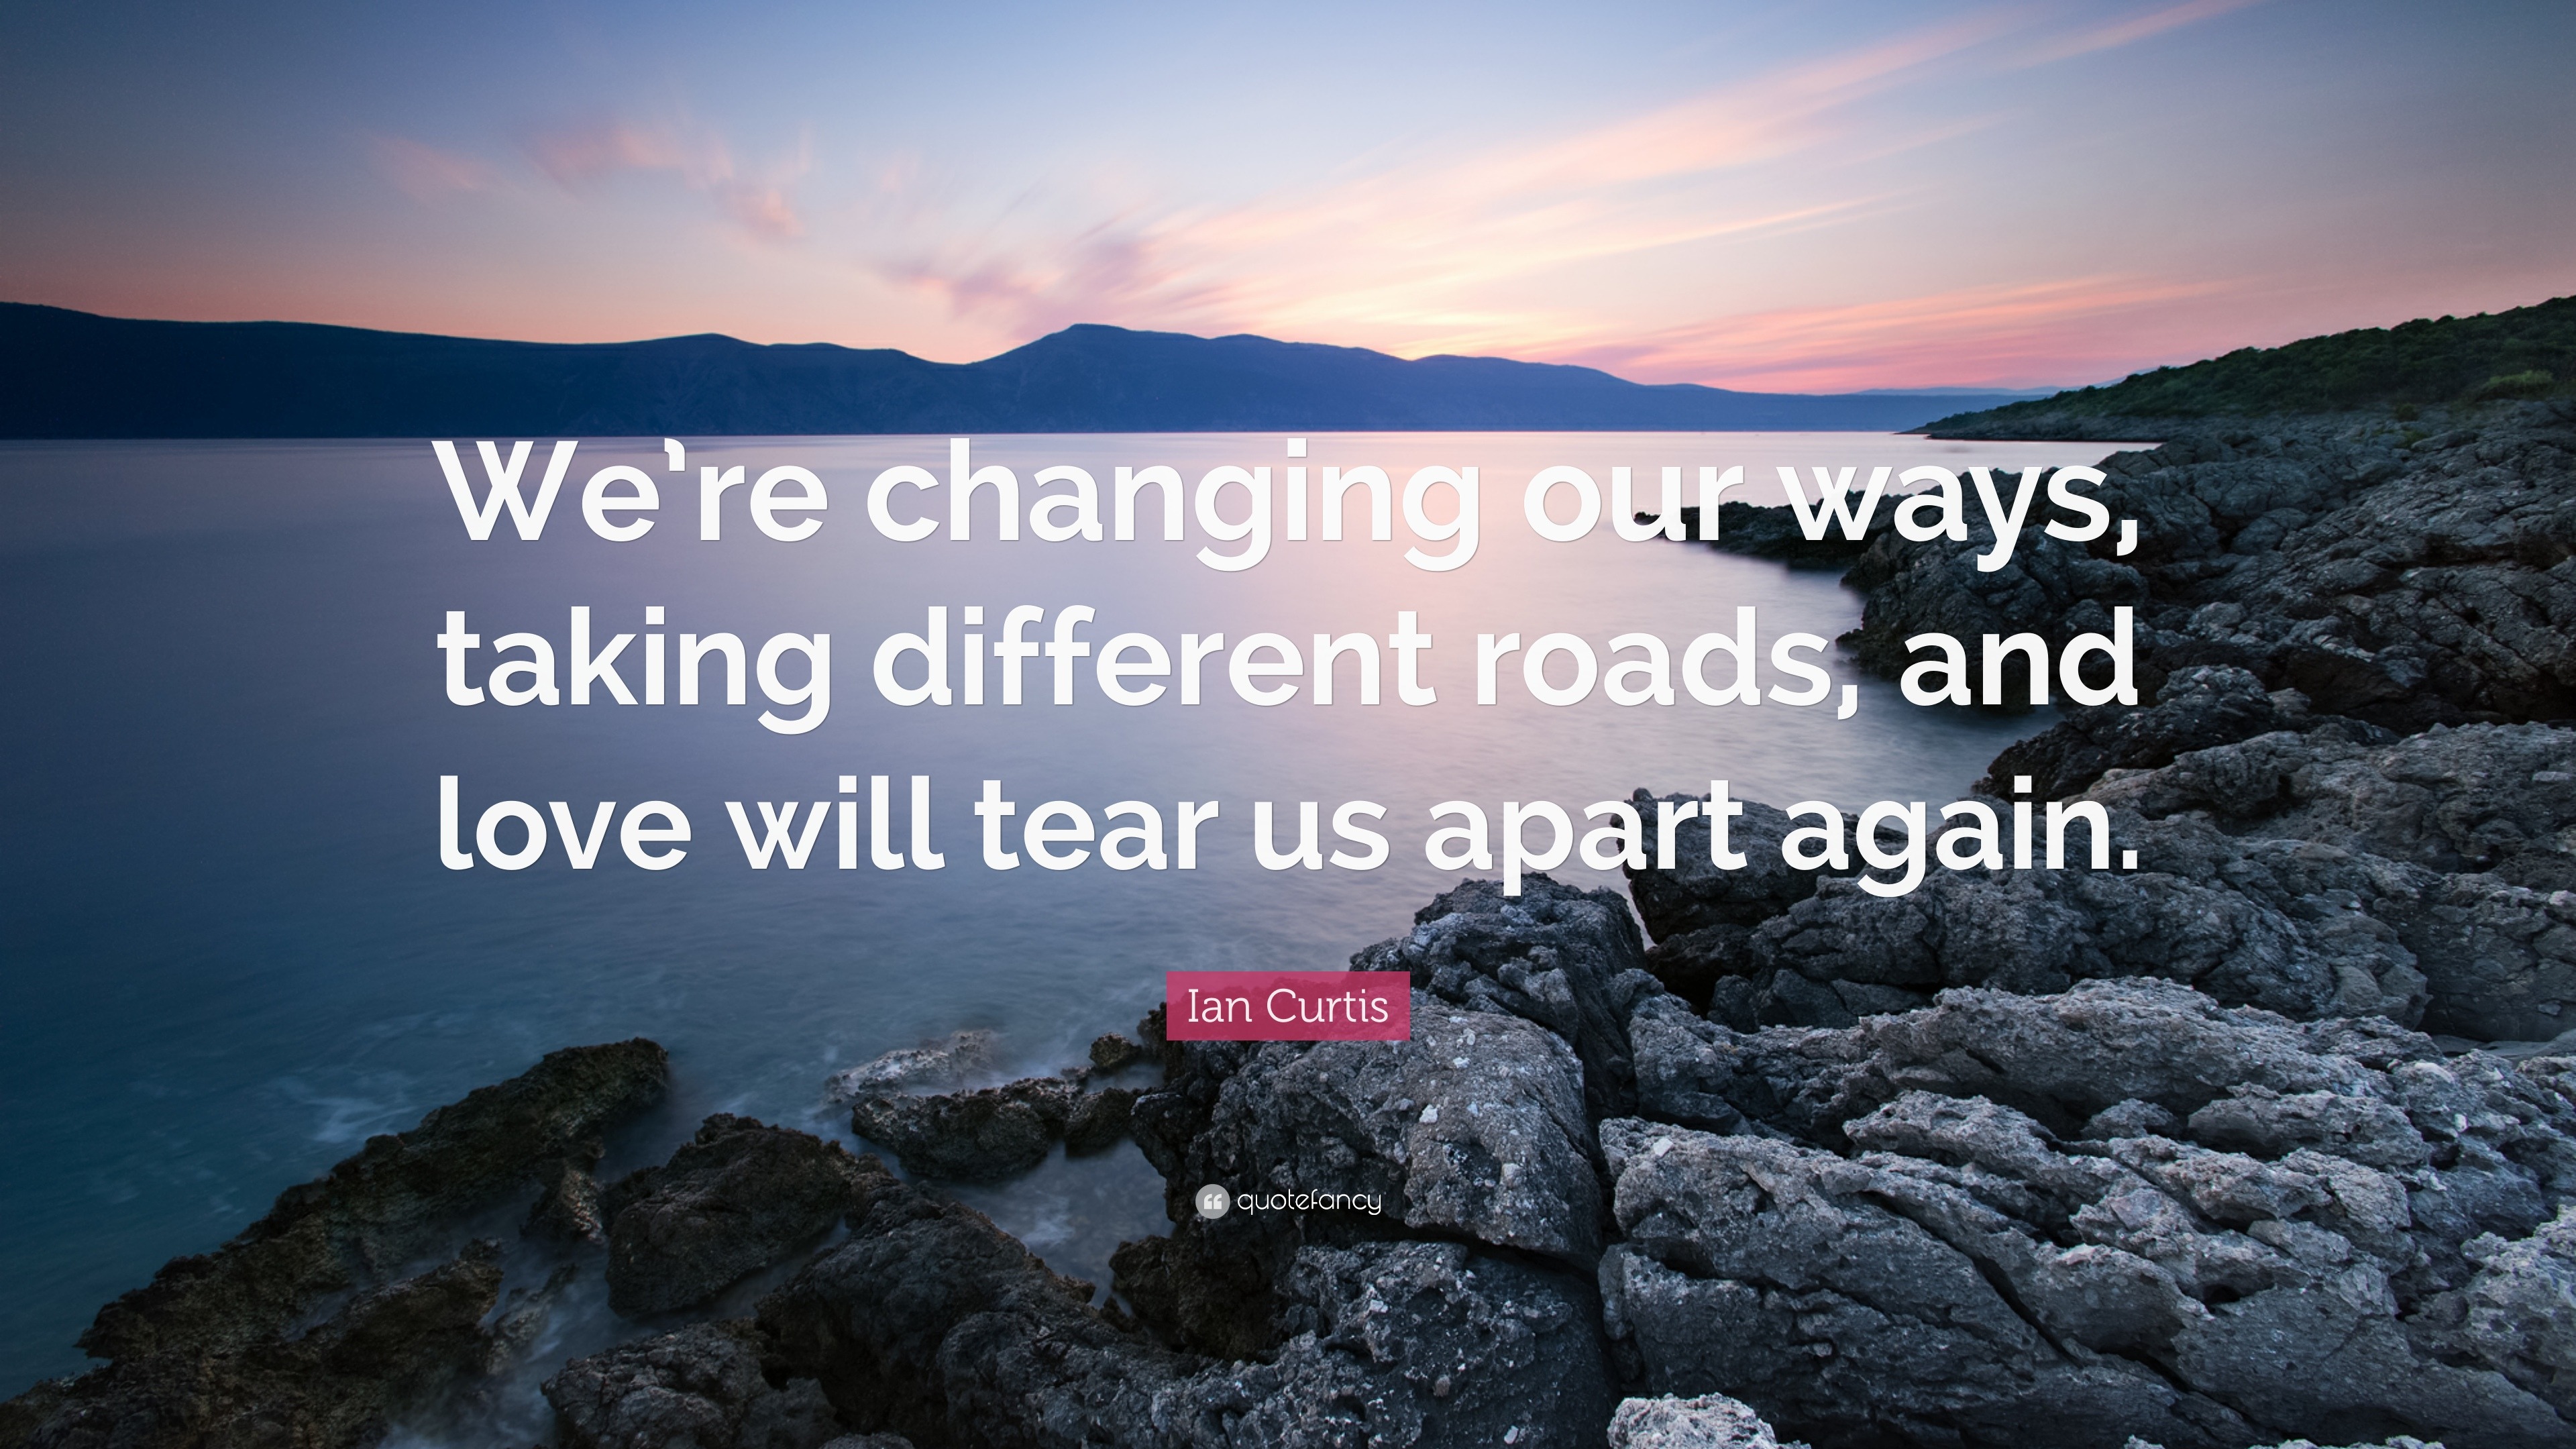 Ian Curtis Quote “We re changing our ways taking different roads